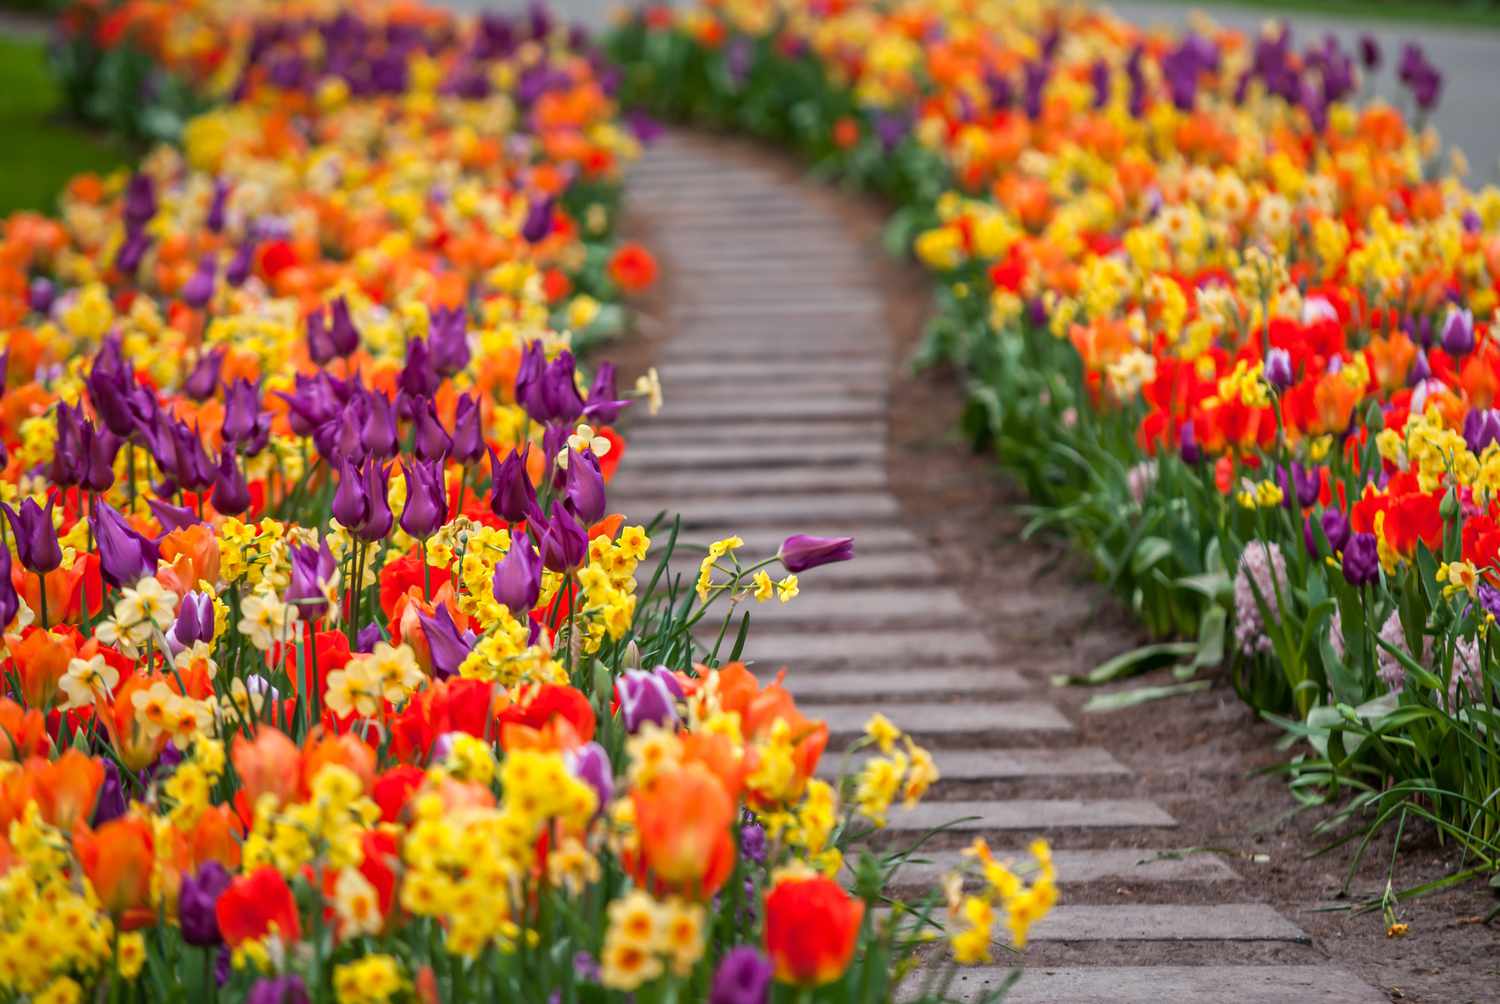 Colorful flowers lining block pathway in garden